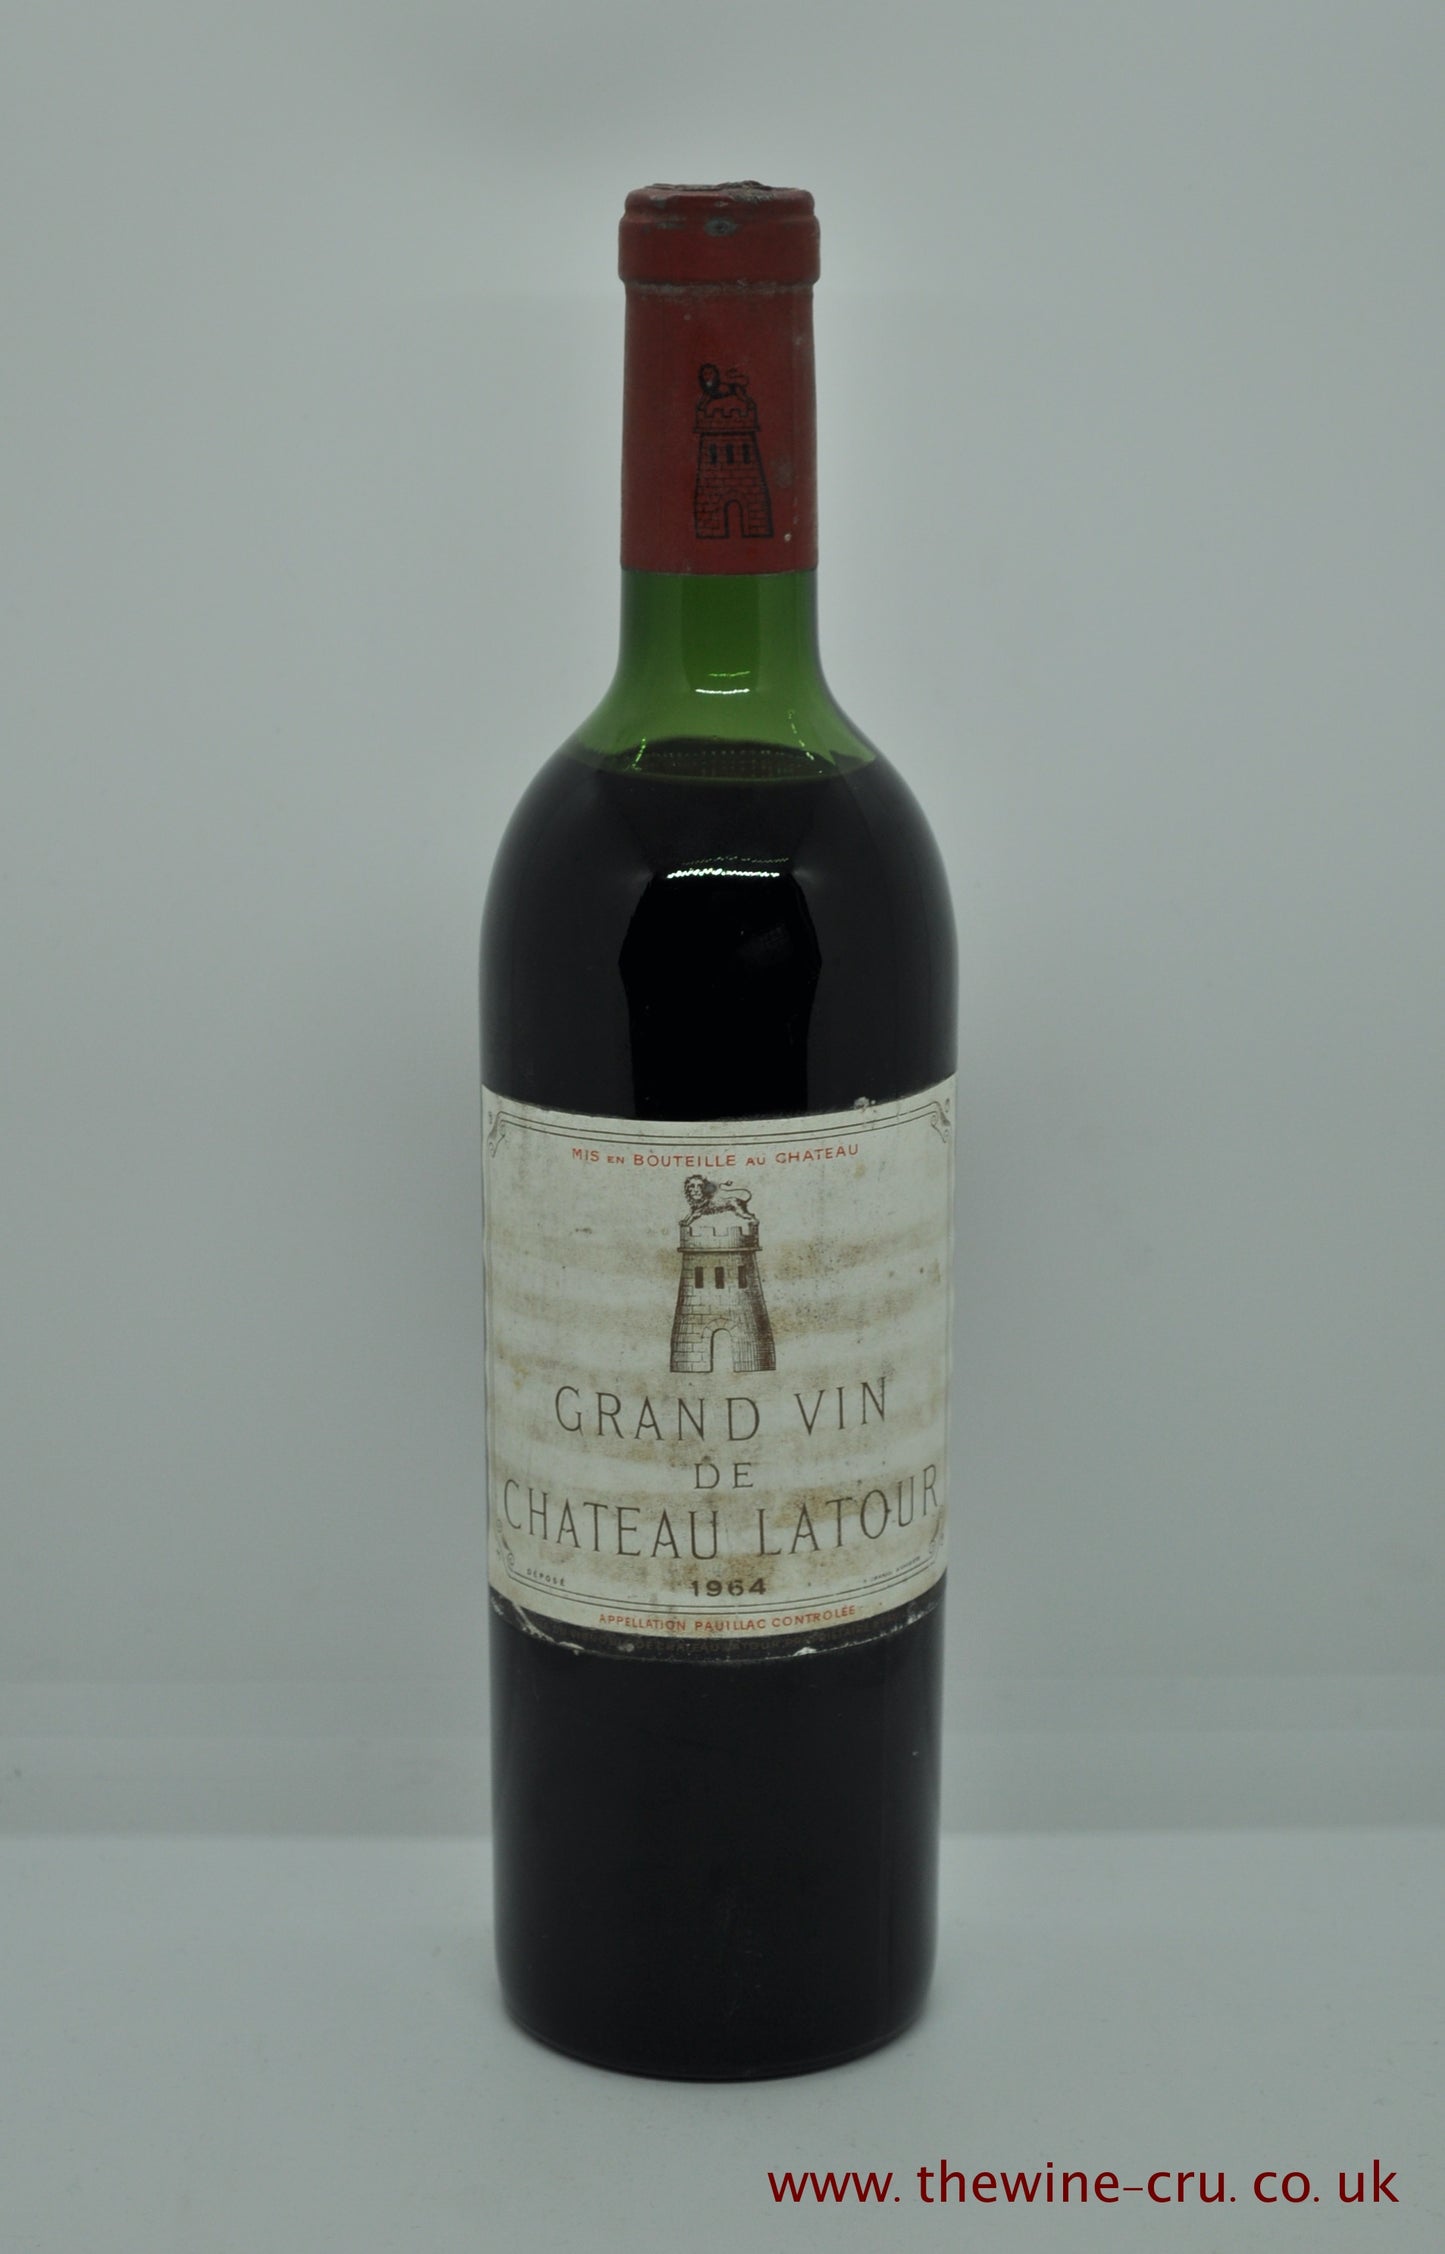 A bottle of 1964 vintage red wine. Chateau Latour, France, Bordeaux, Pauillac. Good capsule and label with the wine level top shoulder. Immediate delivery. Free local delivery. Gift wrapping available.